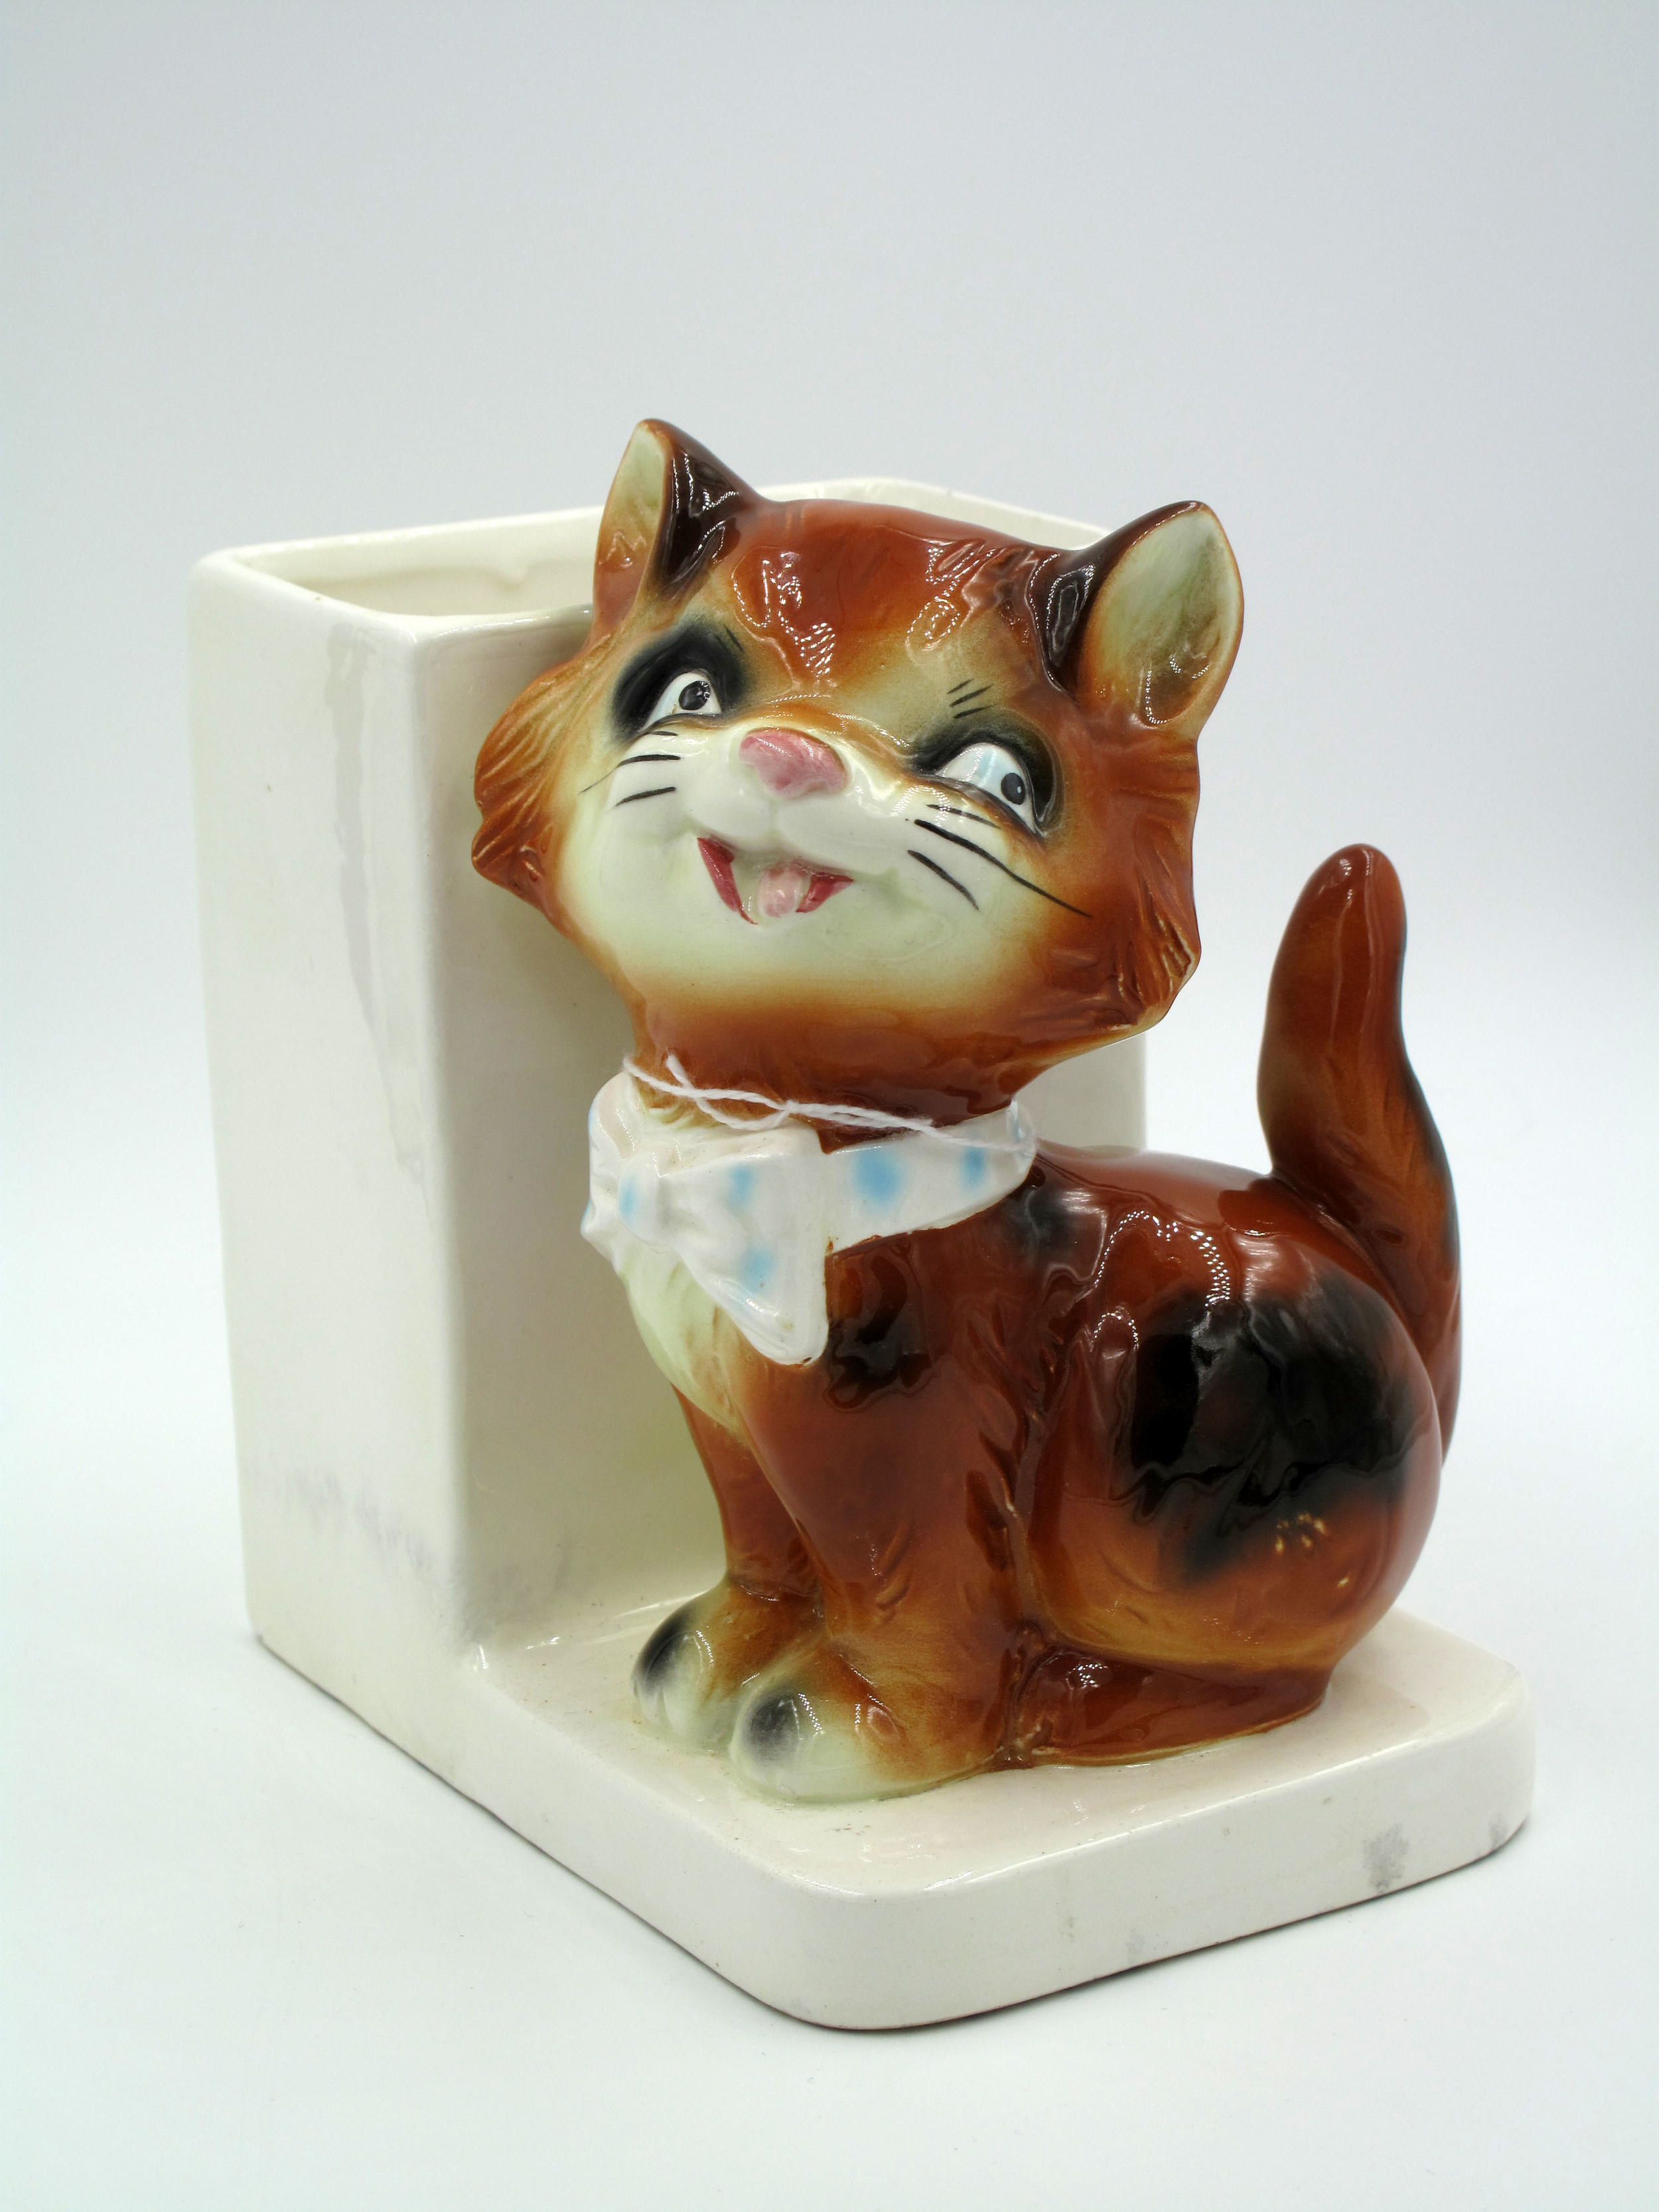 Details about   Red Fox Ceramic Figurine Lot of 4 Made in Japan 